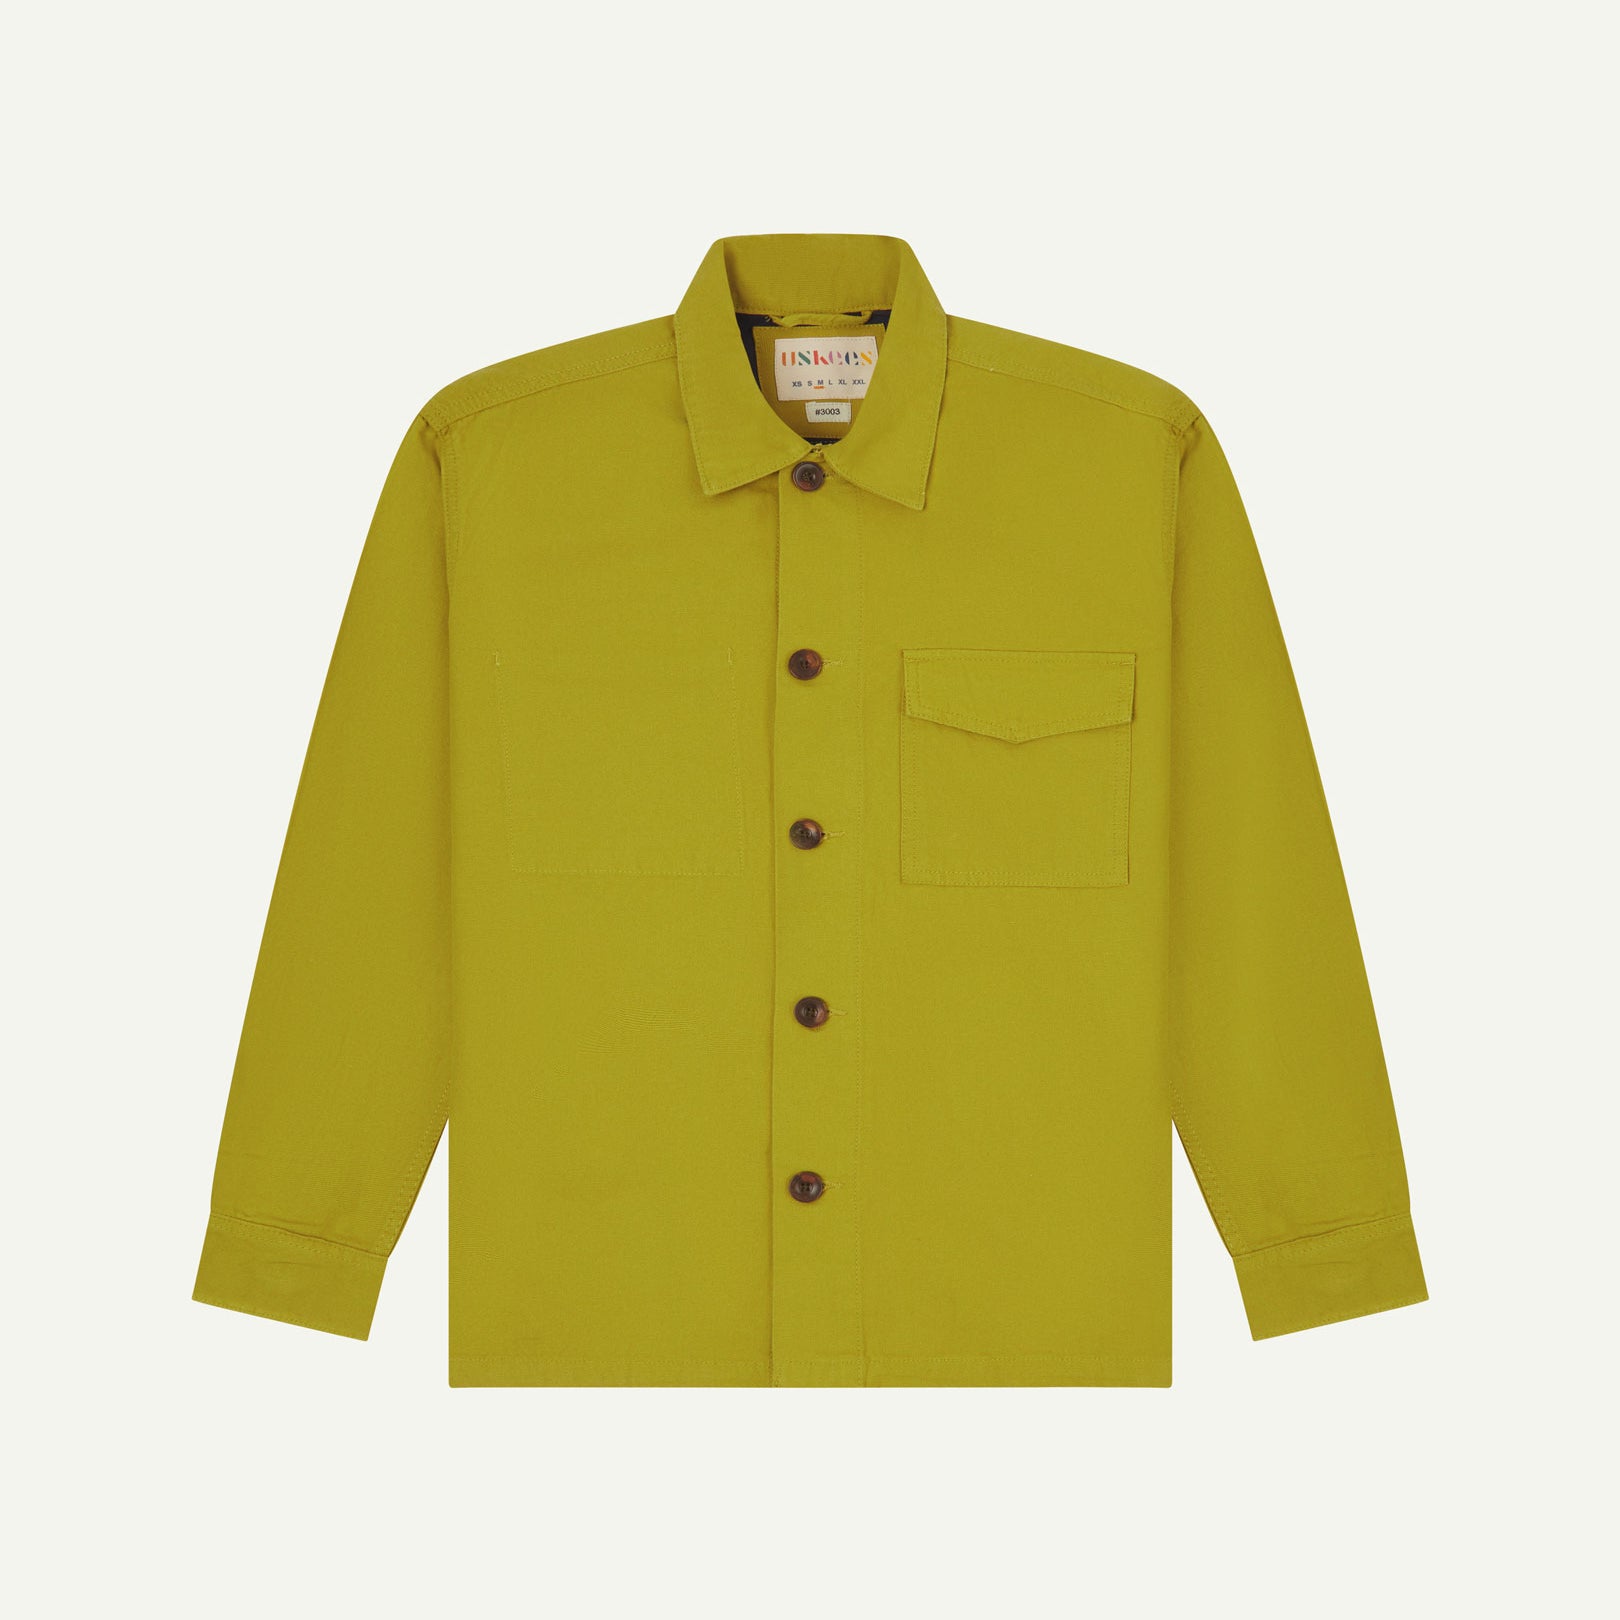 Yellow-green (pear) buttoned organic cotton workshirt from Uskees with clear view of chest pocket and Uskees branding label.